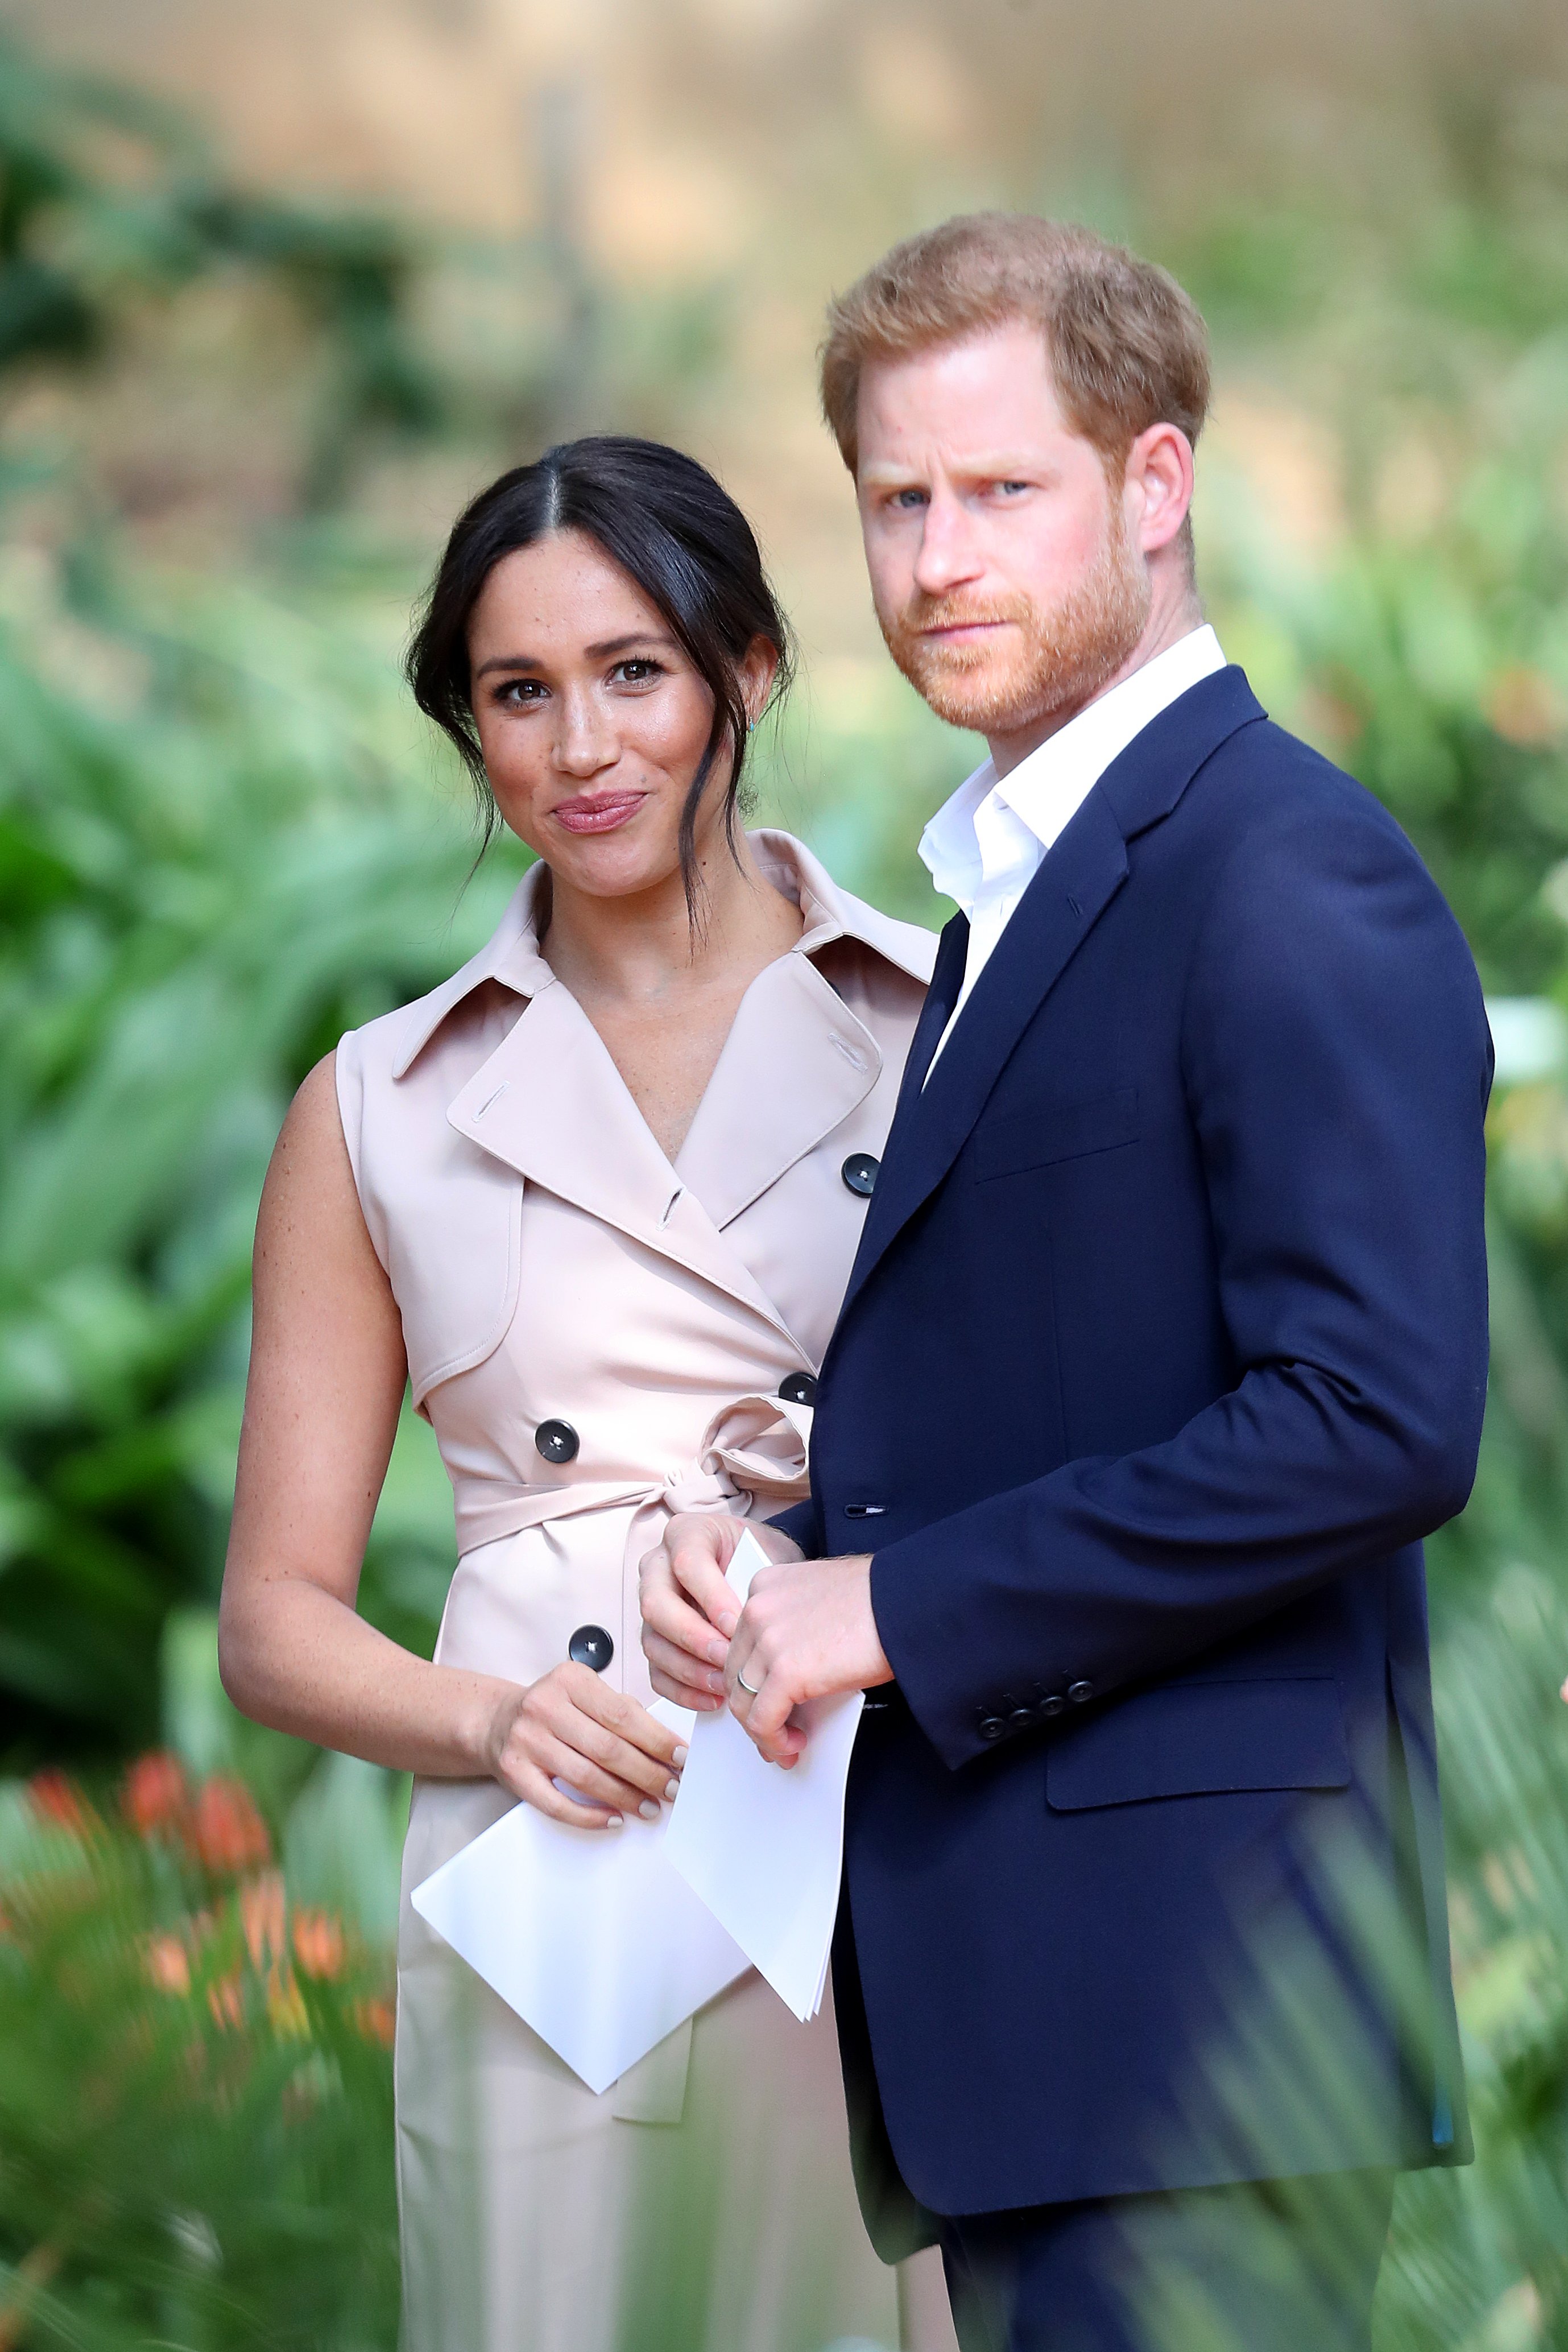 Prince Harry and Meghan Markle in Johannesburg, South Africa on October 02, 2019  | Photo: Getty Images